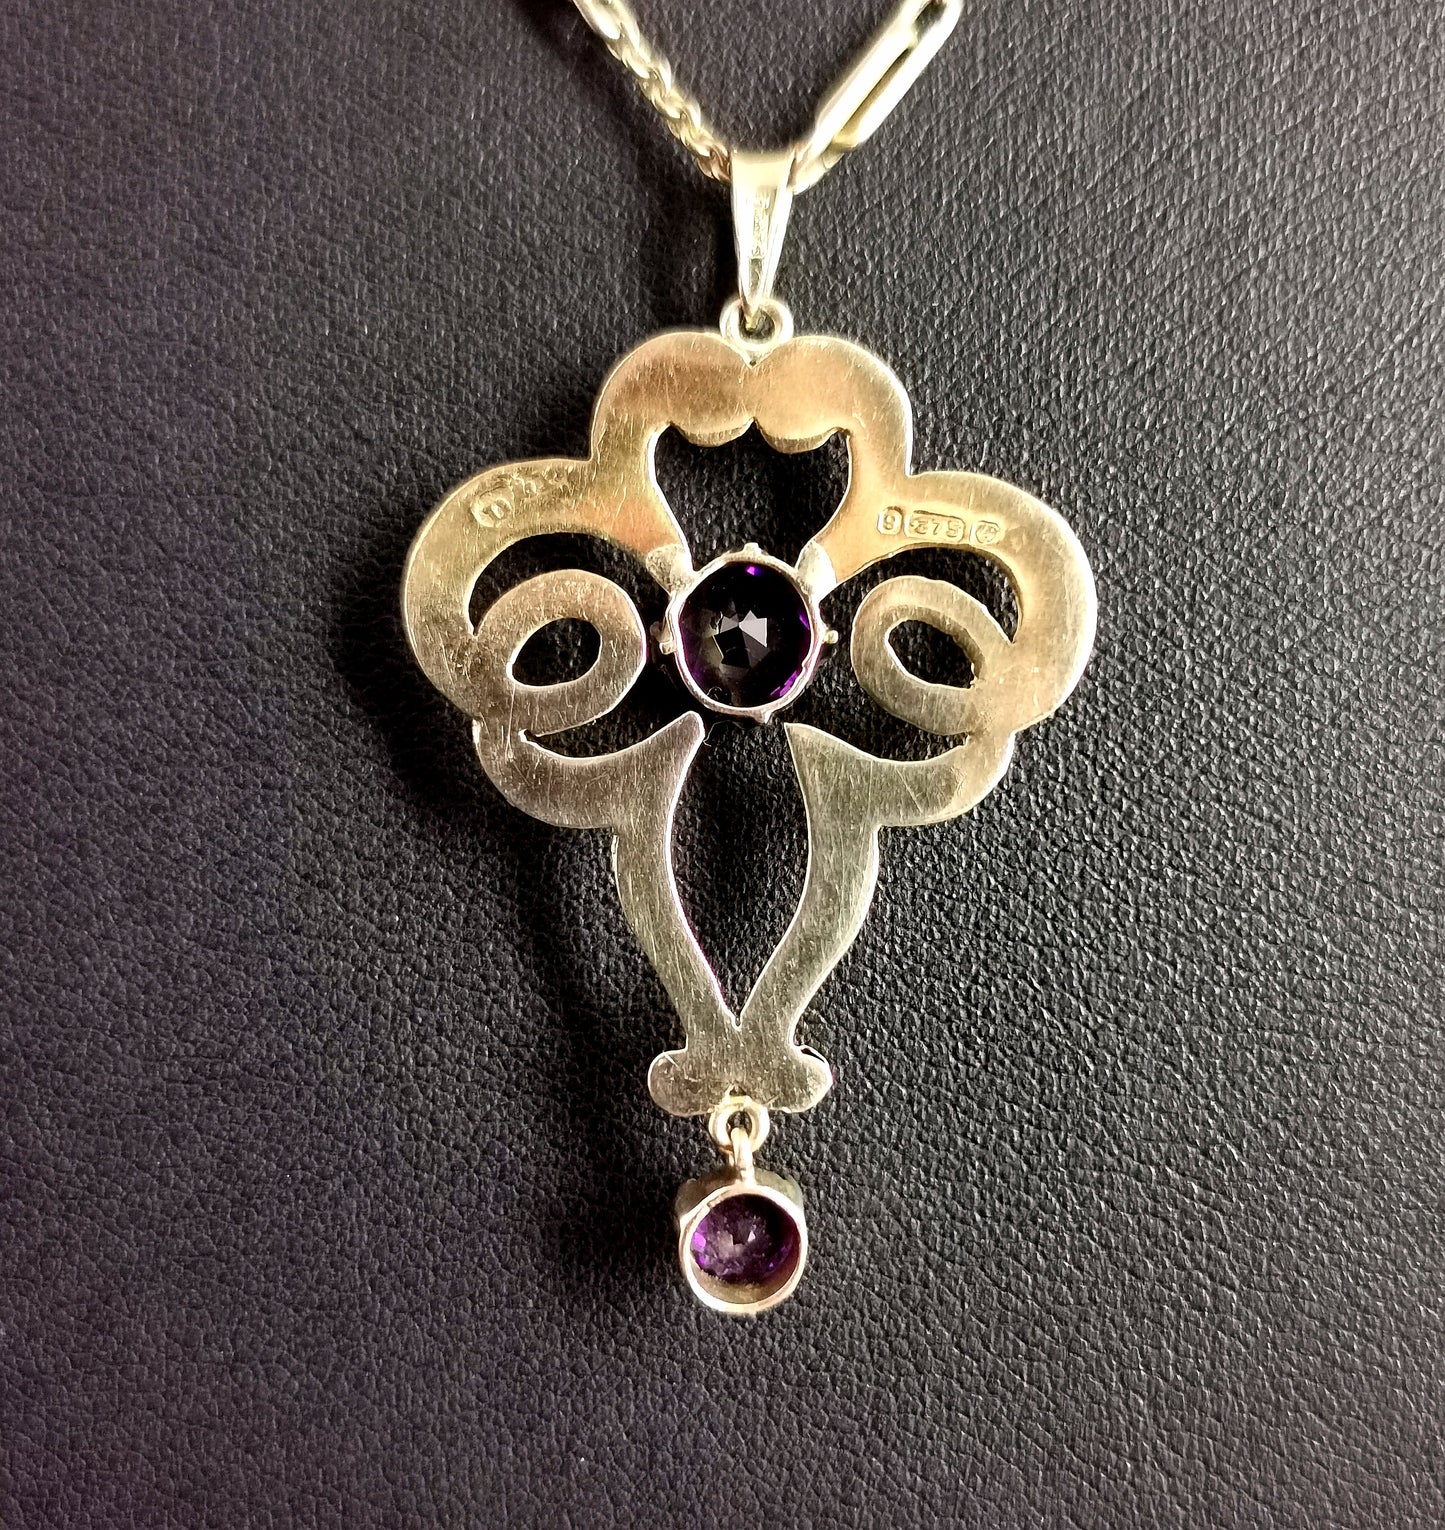 Antique Edwardian lavalier pendant, 9ct gold and Amethyst